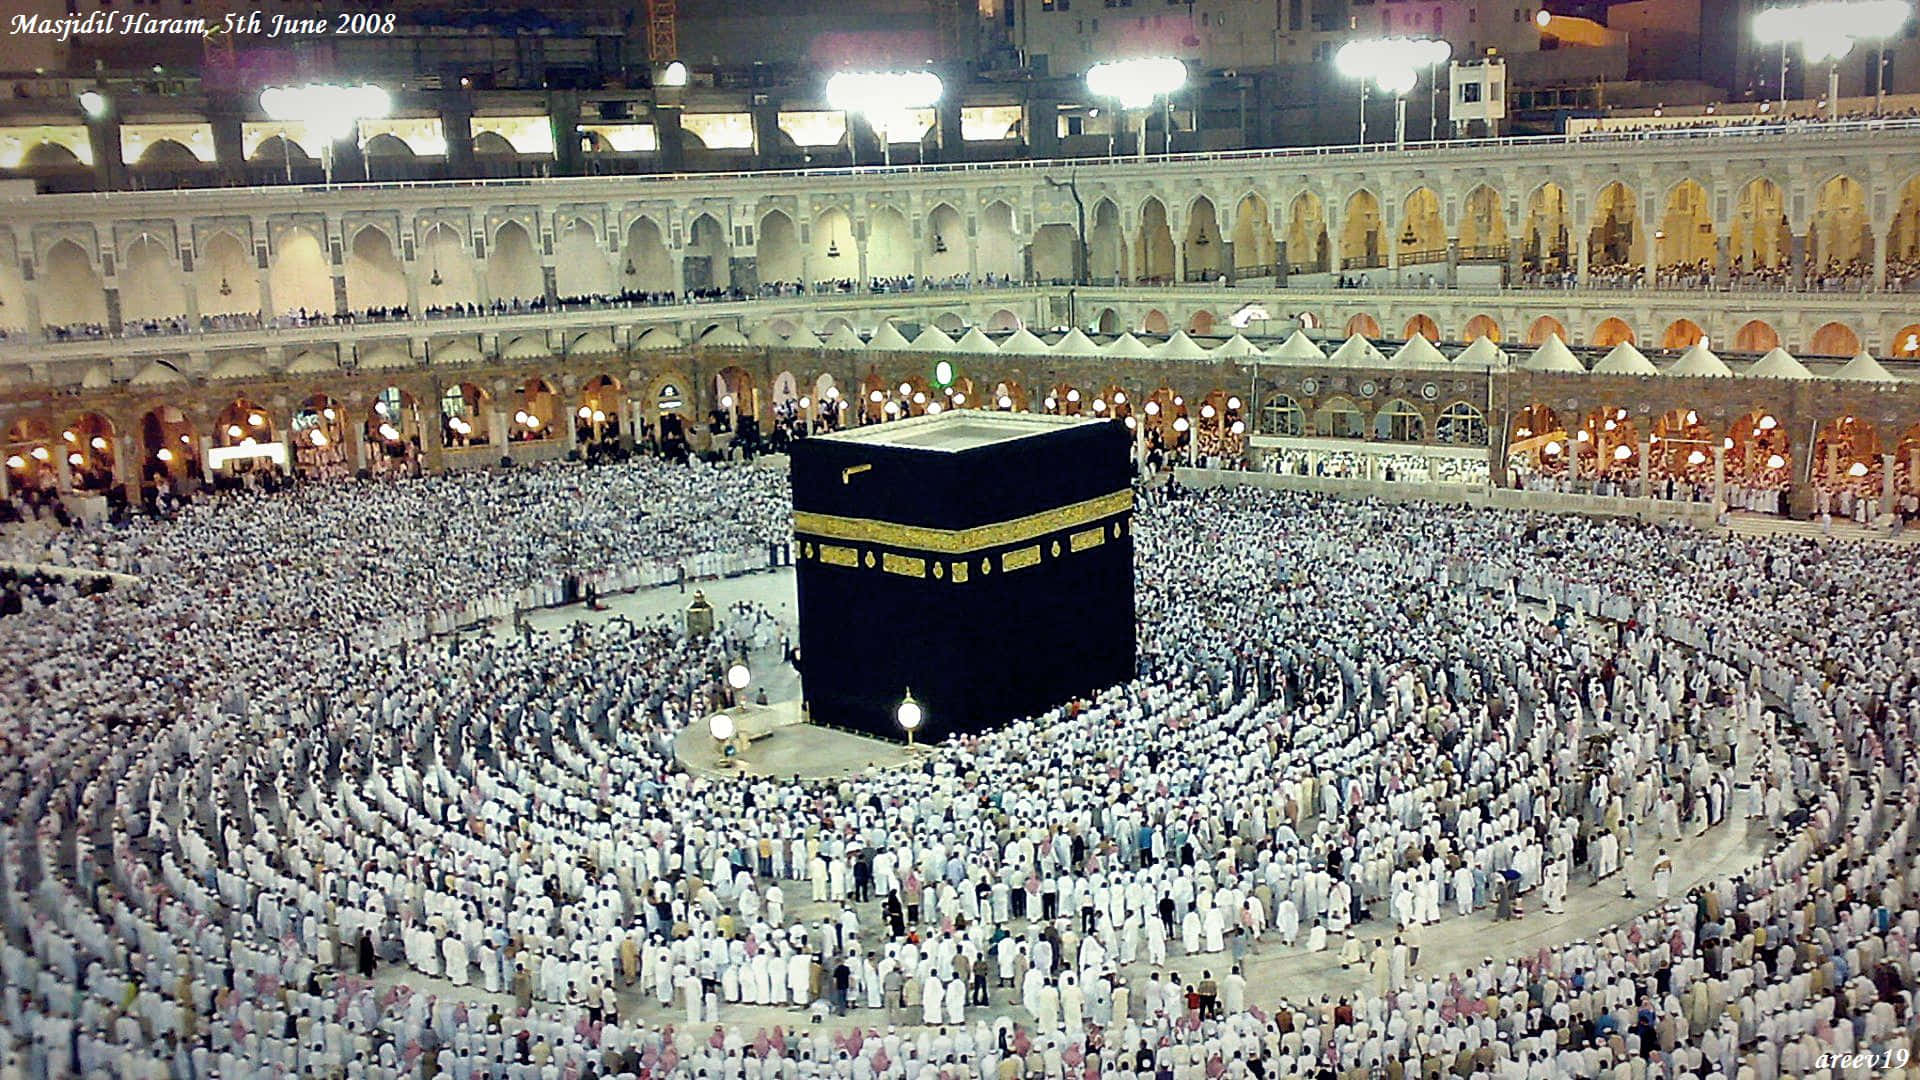 "The blue-tiled Kaaba surrounded by worshippers in the center of the Grand Mosque of Mecca in Saudi Arabia"